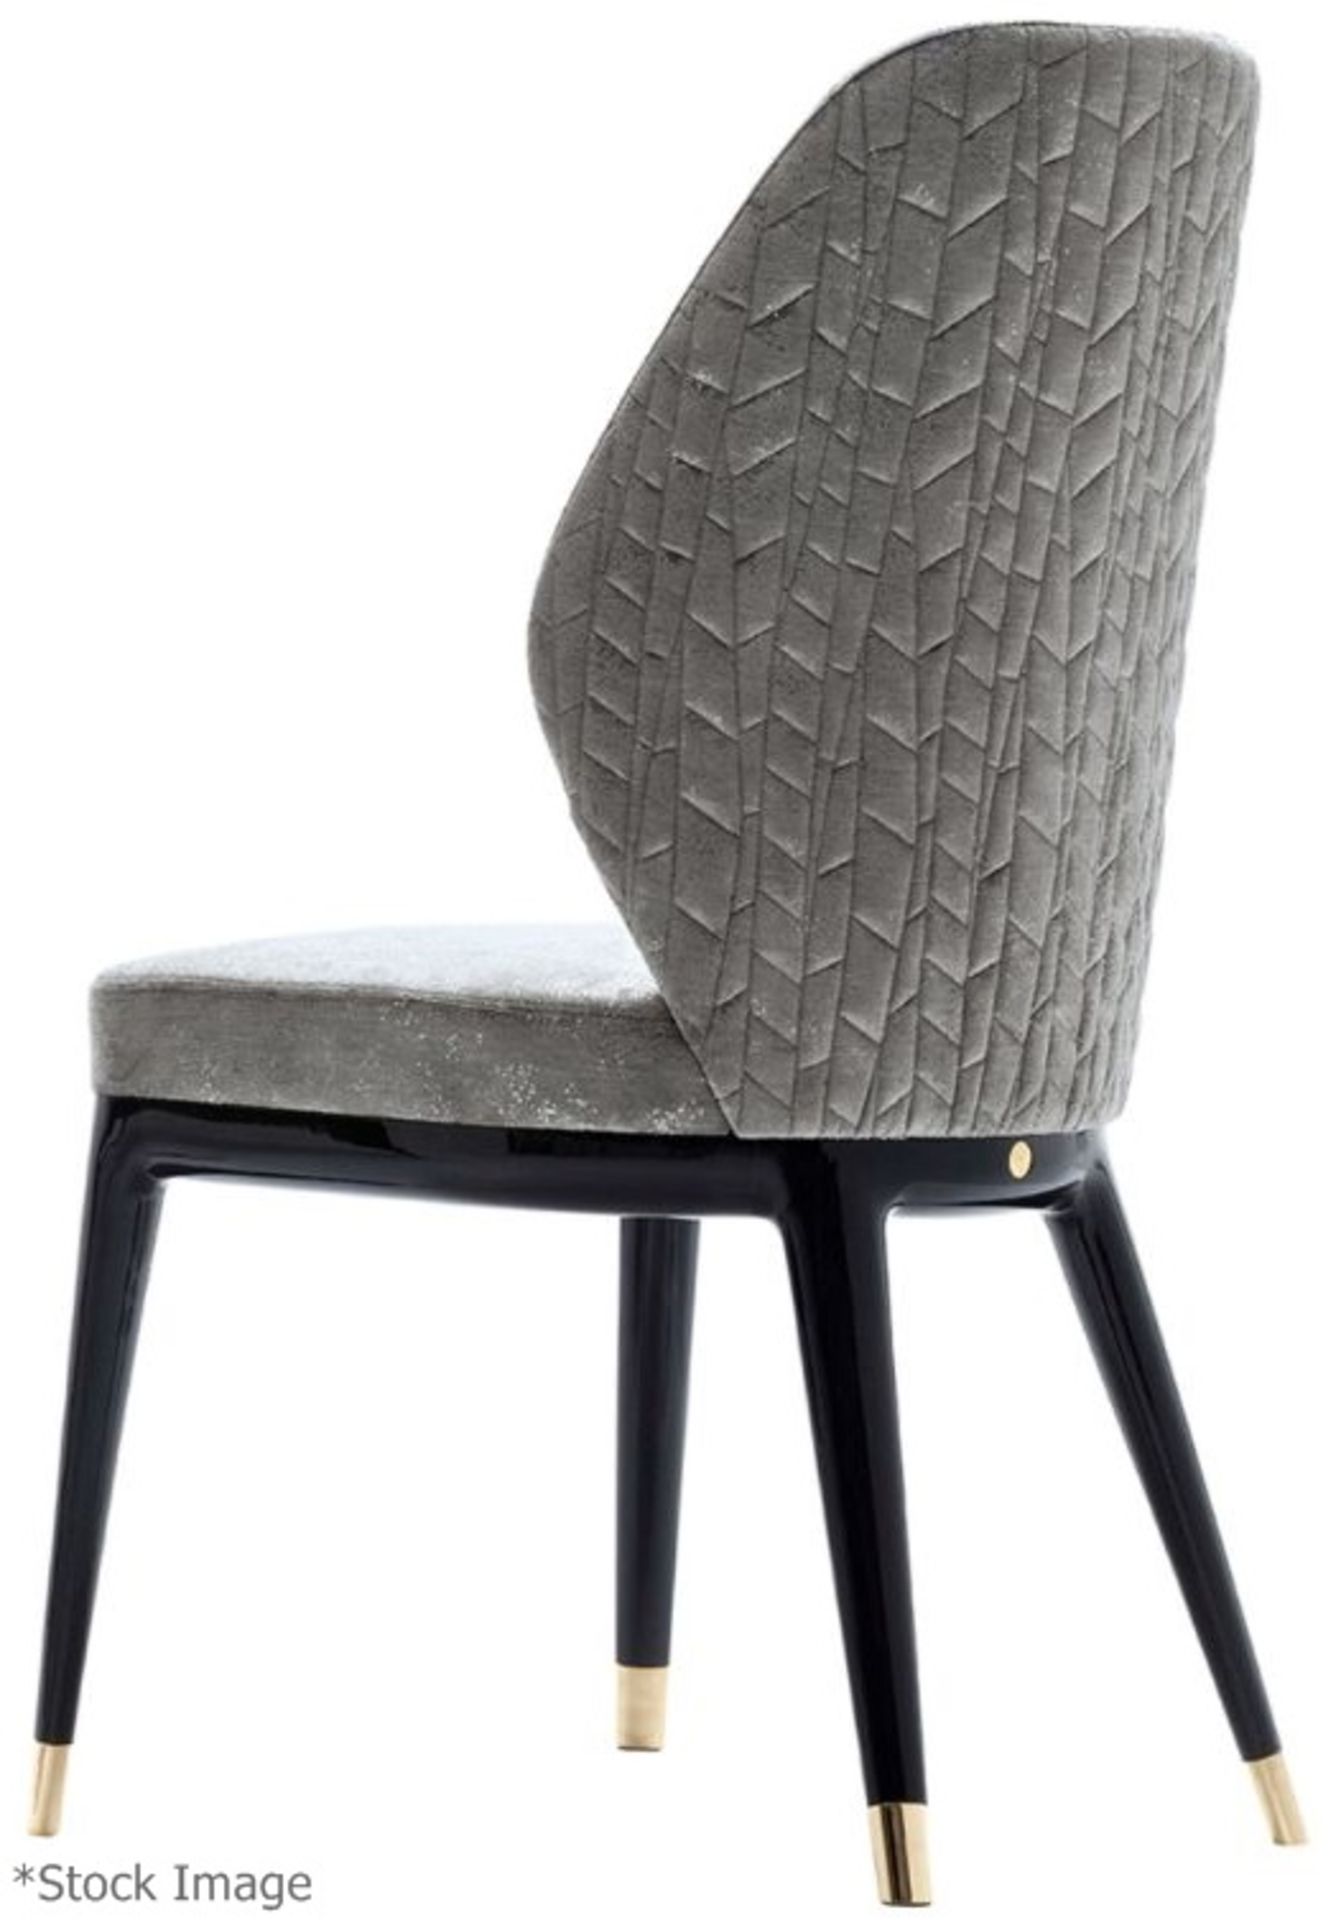 6 x GIORGIO COLLECTION 'Charisma' Luxury Dining Side Chairs In Blue - Total Original Price £15,330 - Image 2 of 17